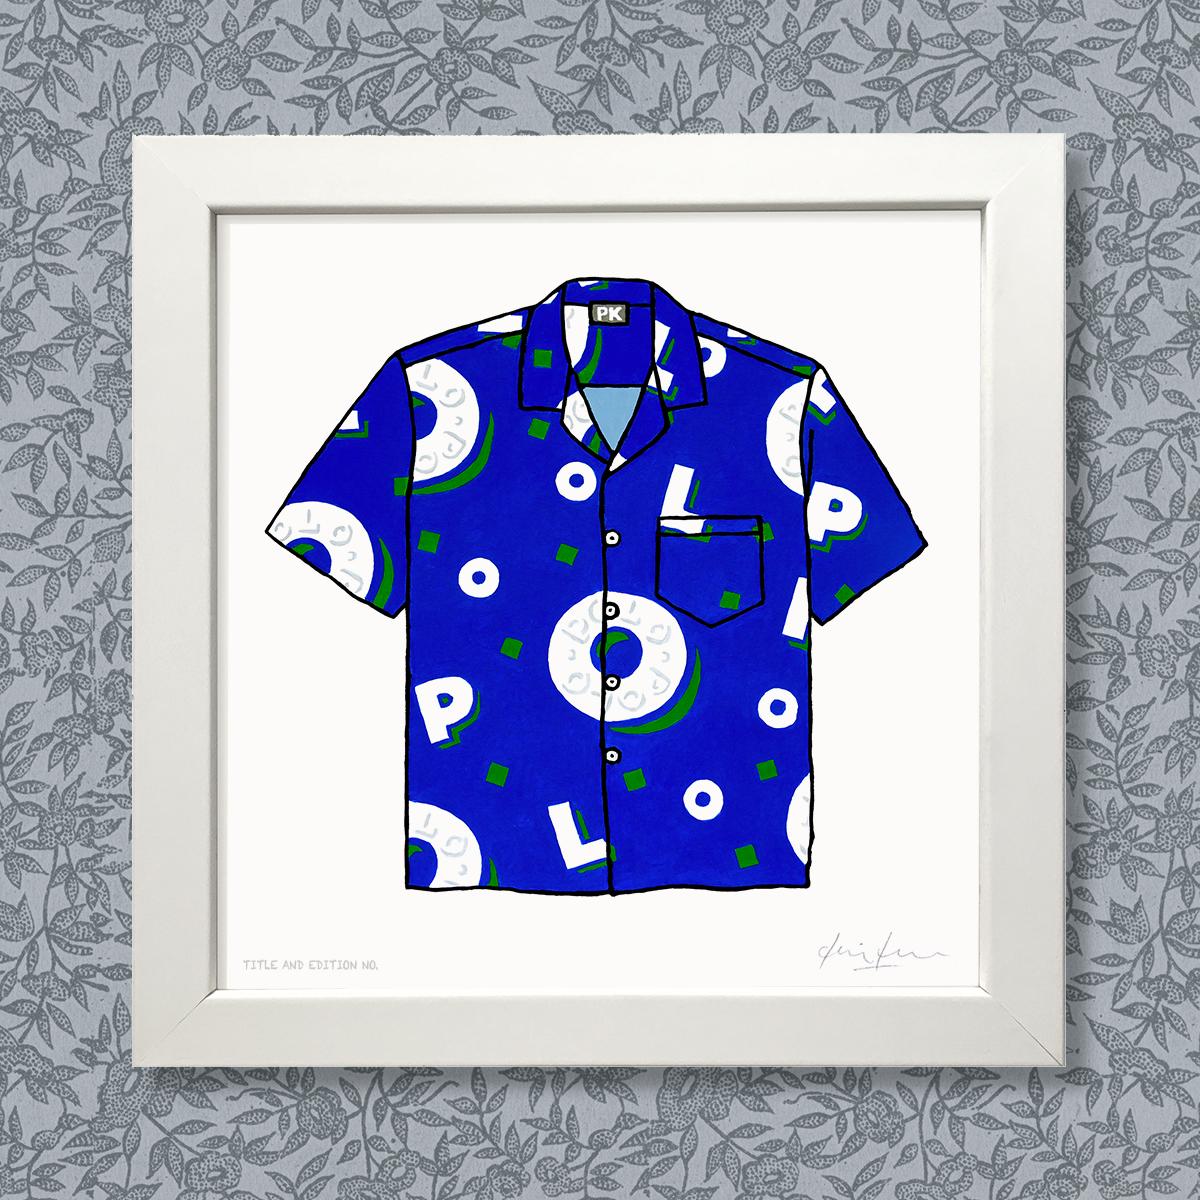 Limited edition print - Polo Shirt - in white frame